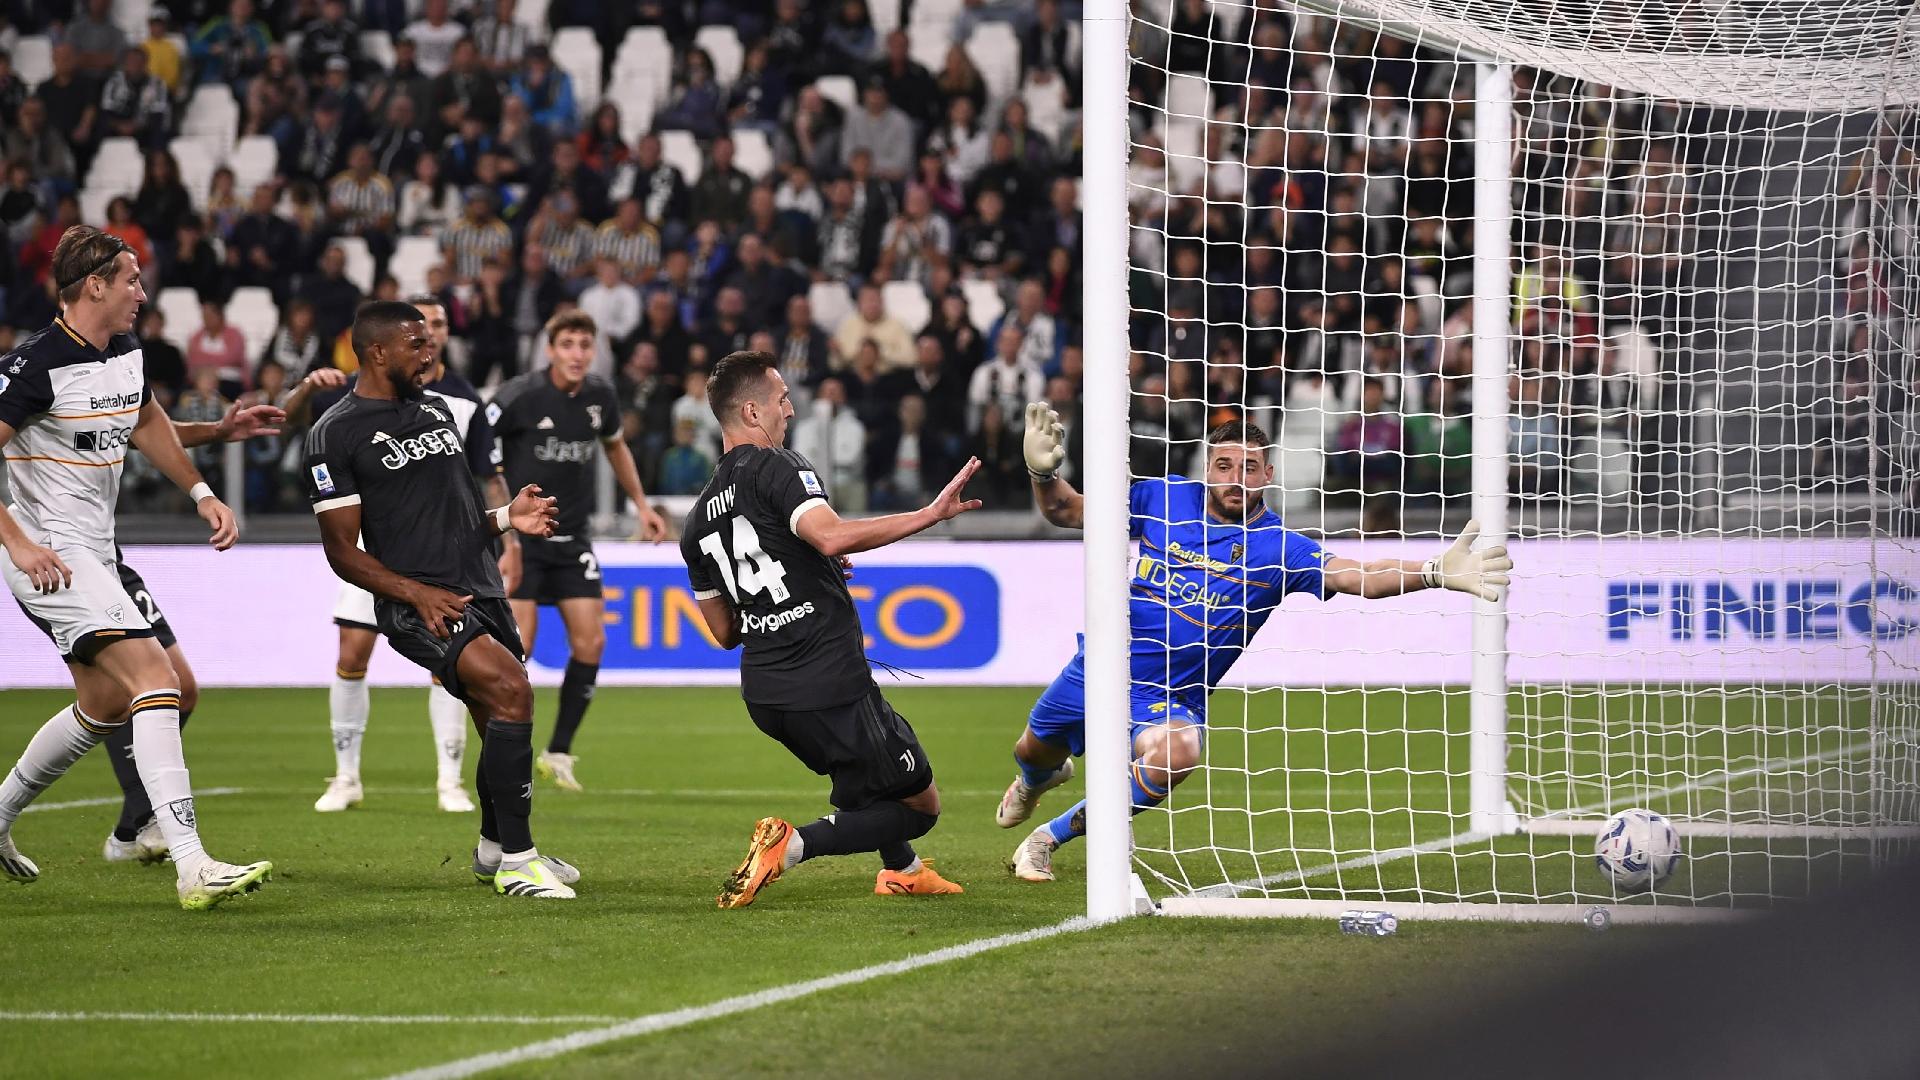 Arkadiusz Milik fires Juventus to victory against Lecce as Bianconeri go second